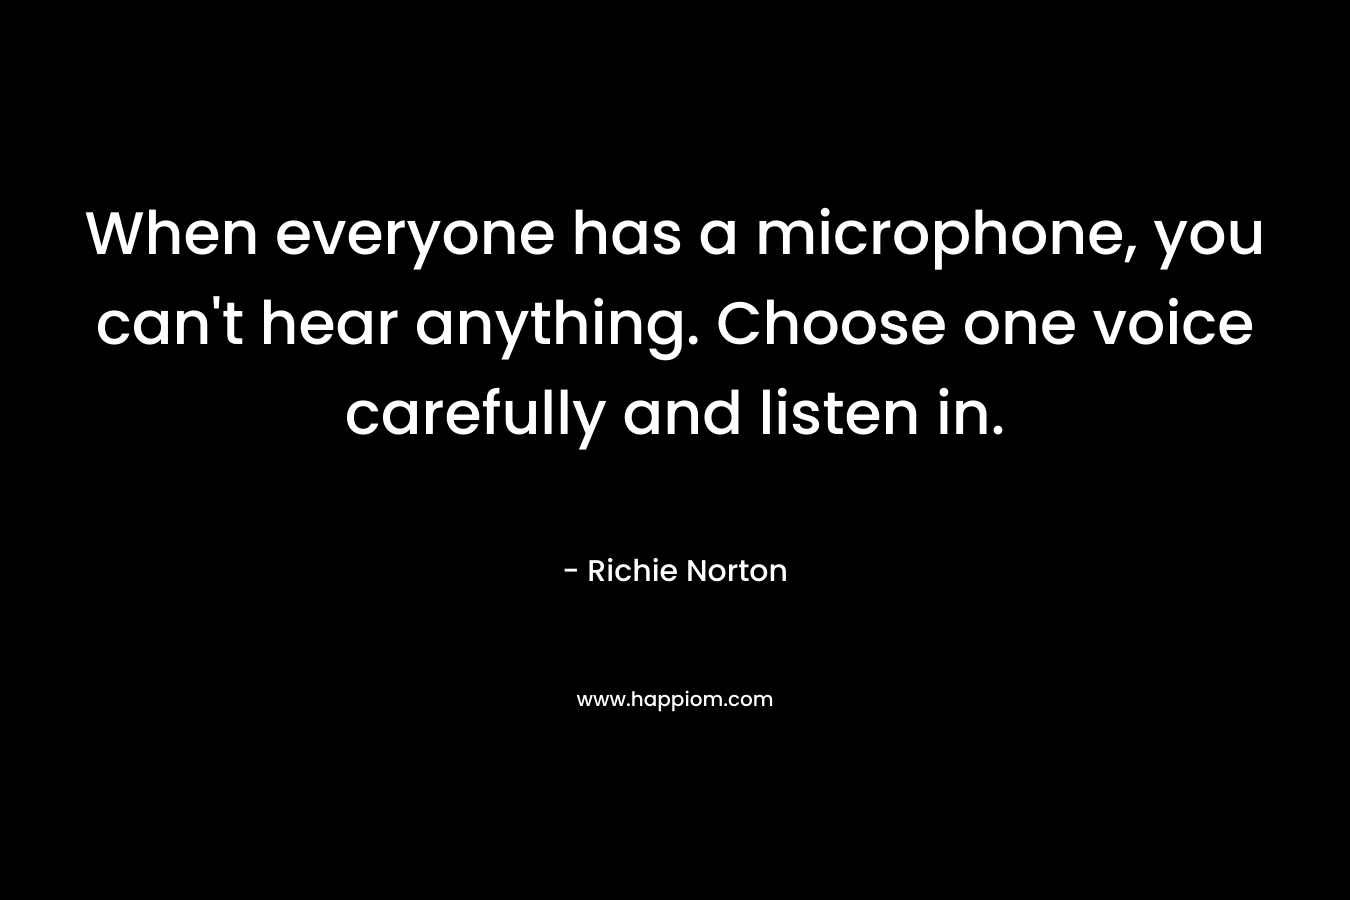 When everyone has a microphone, you can’t hear anything. Choose one voice carefully and listen in. – Richie Norton